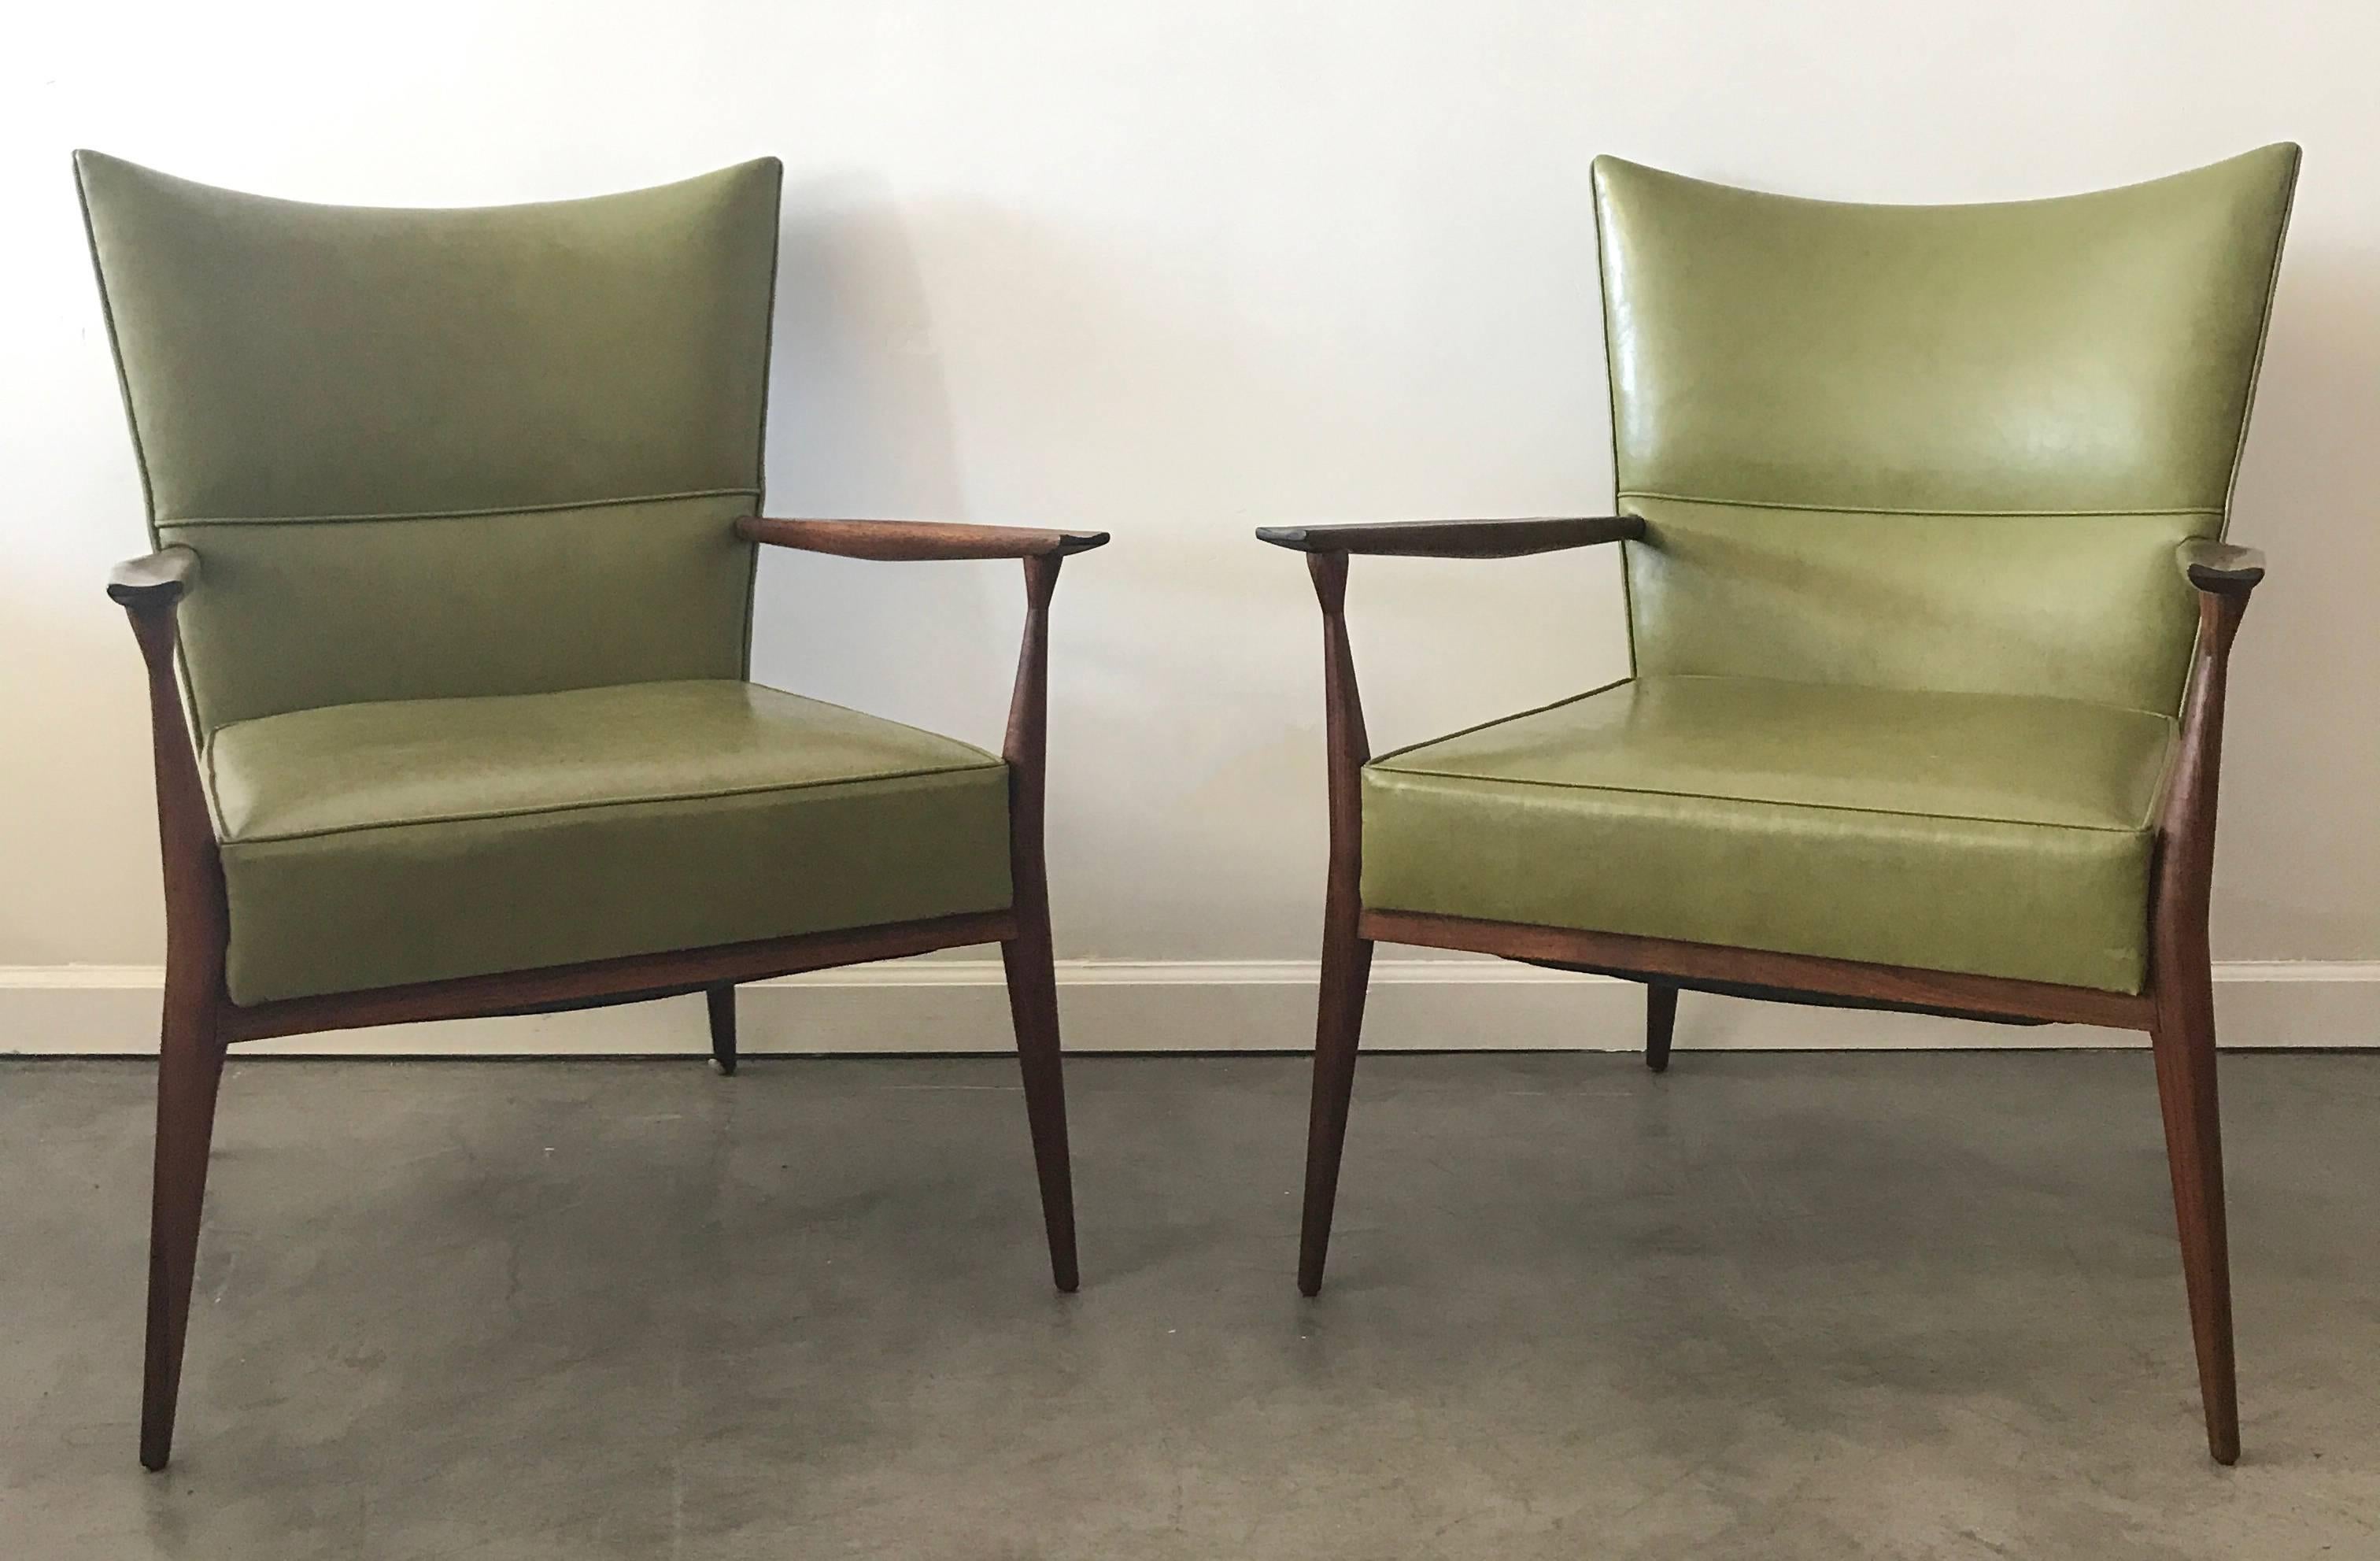 Absolutely stunning and increasingly rare Paul McCobb pull-up armchairs. These chairs are in all-original near mint condition, with very minimal wear to commensurate with age. Sculpted walnut arms and frame with original avocado / olive green vinyl